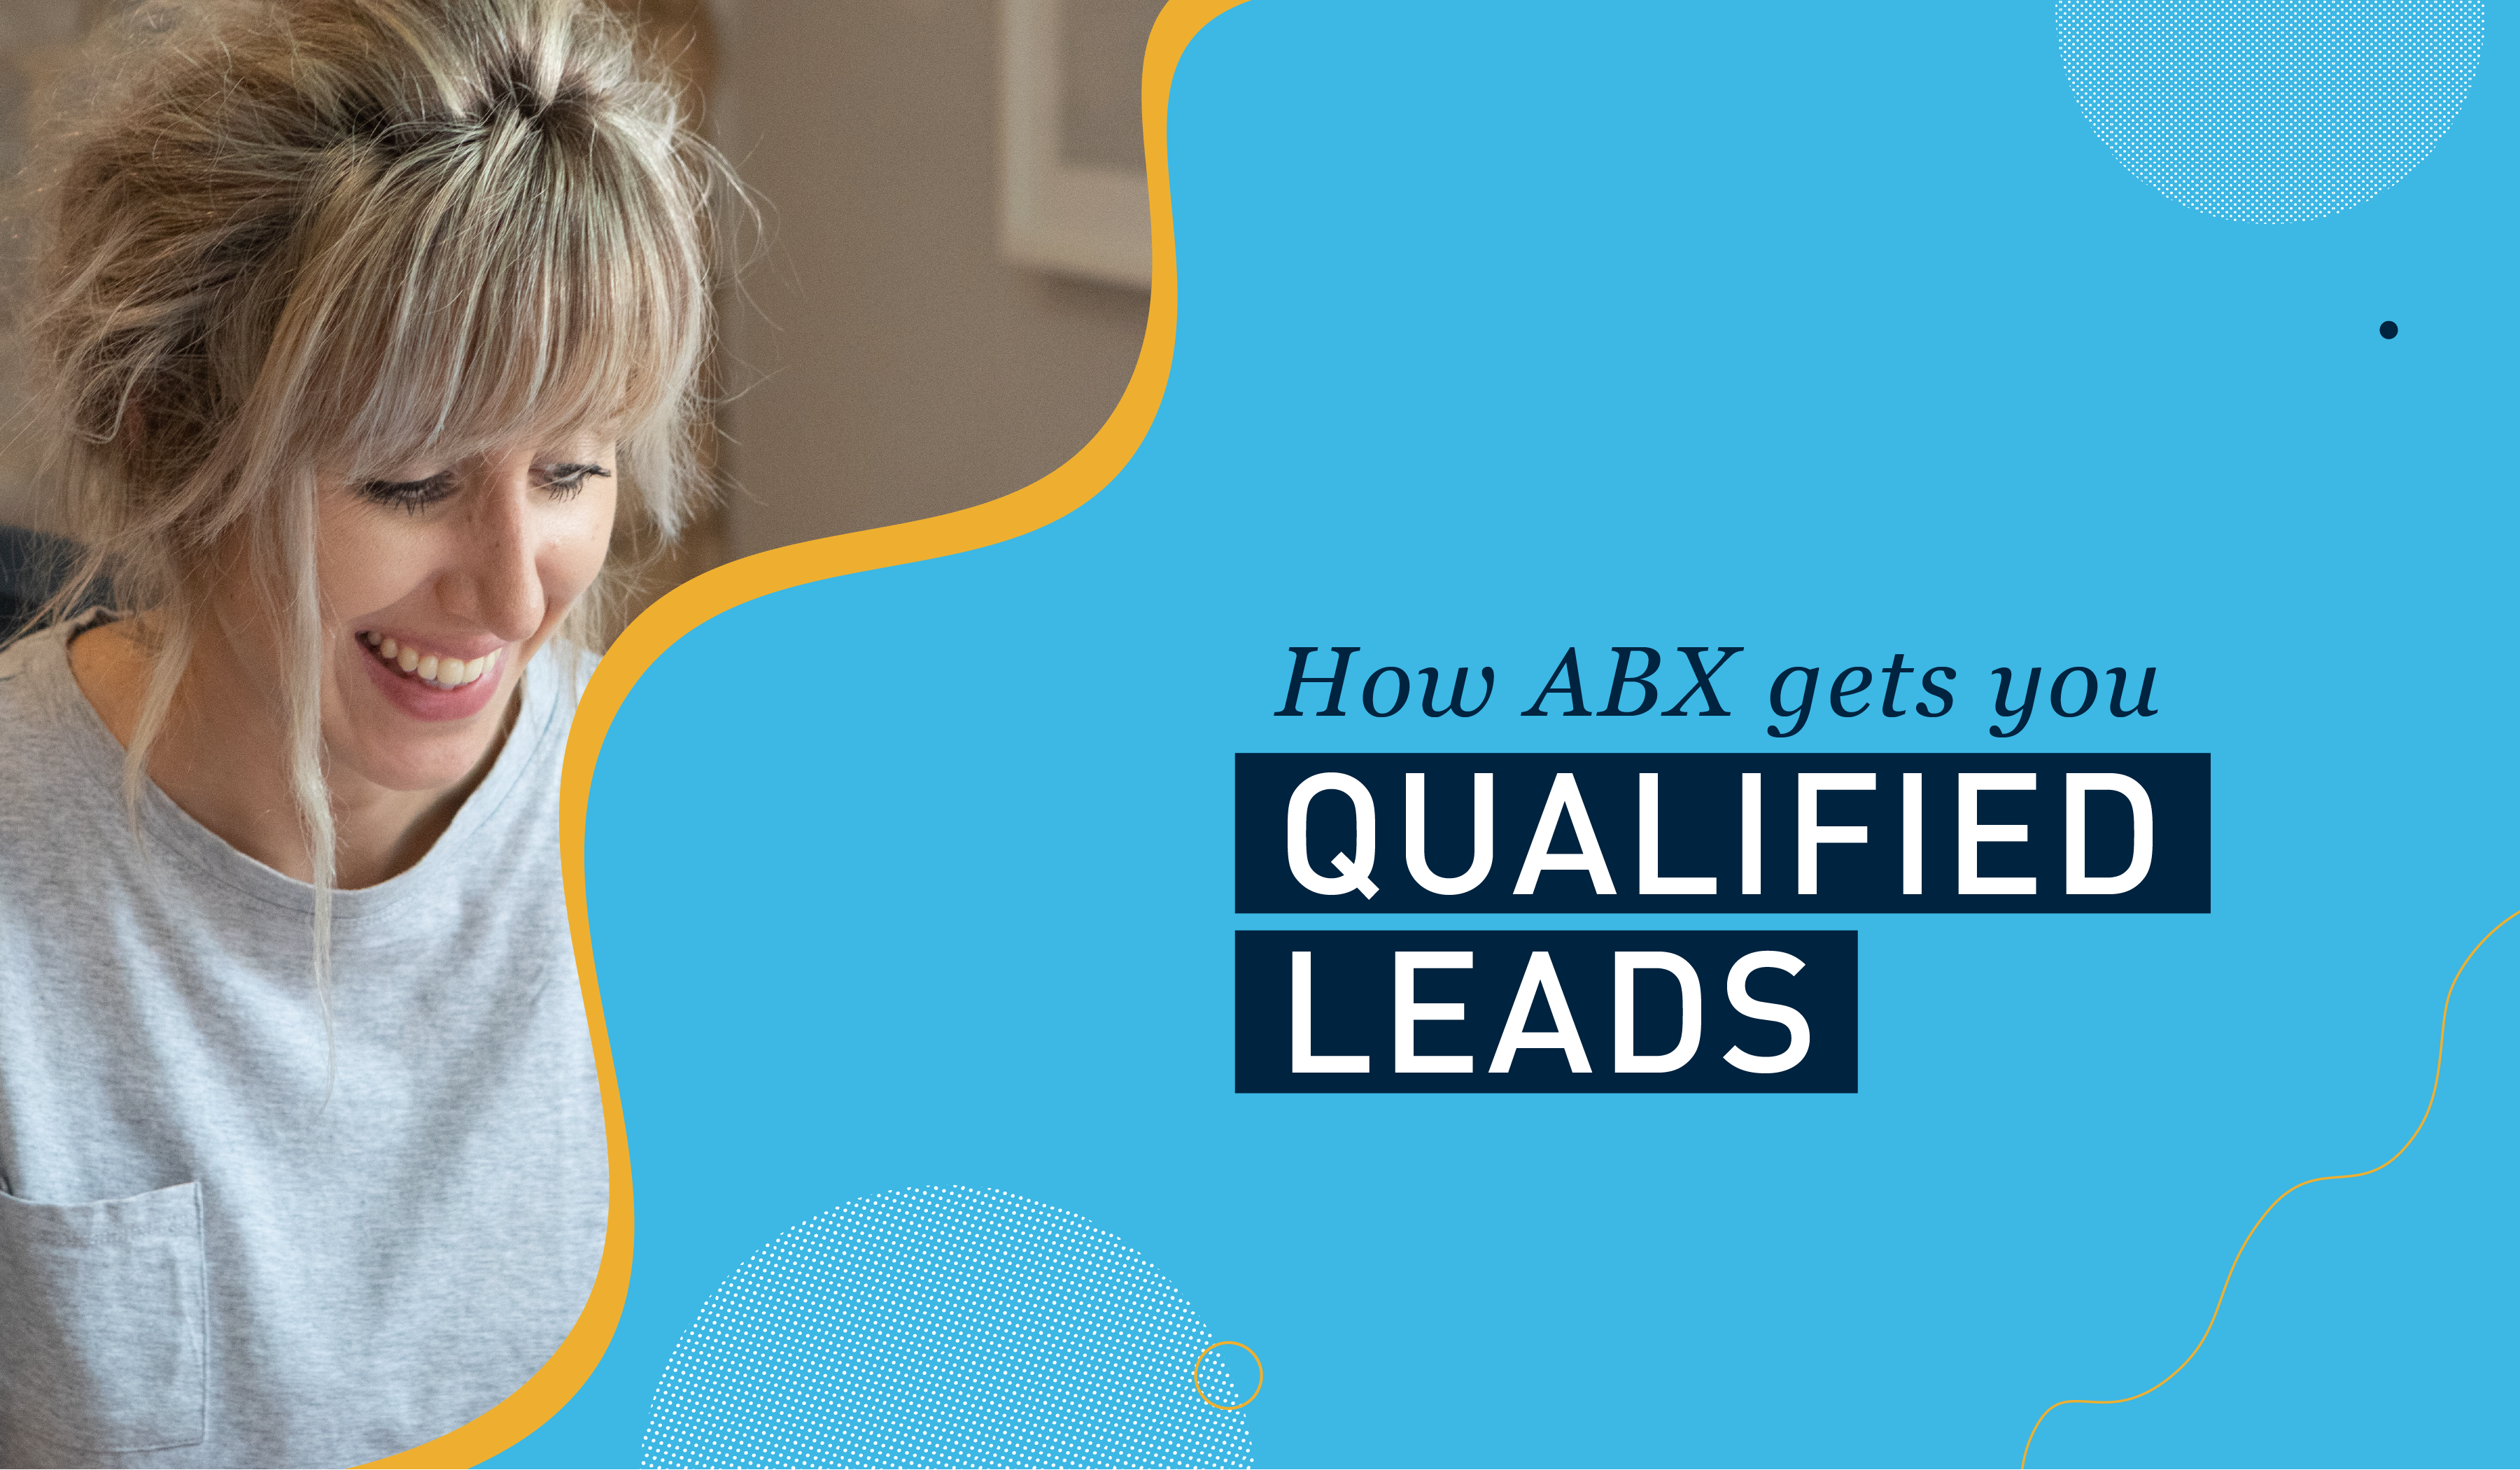 How ABX gets you qualified leads